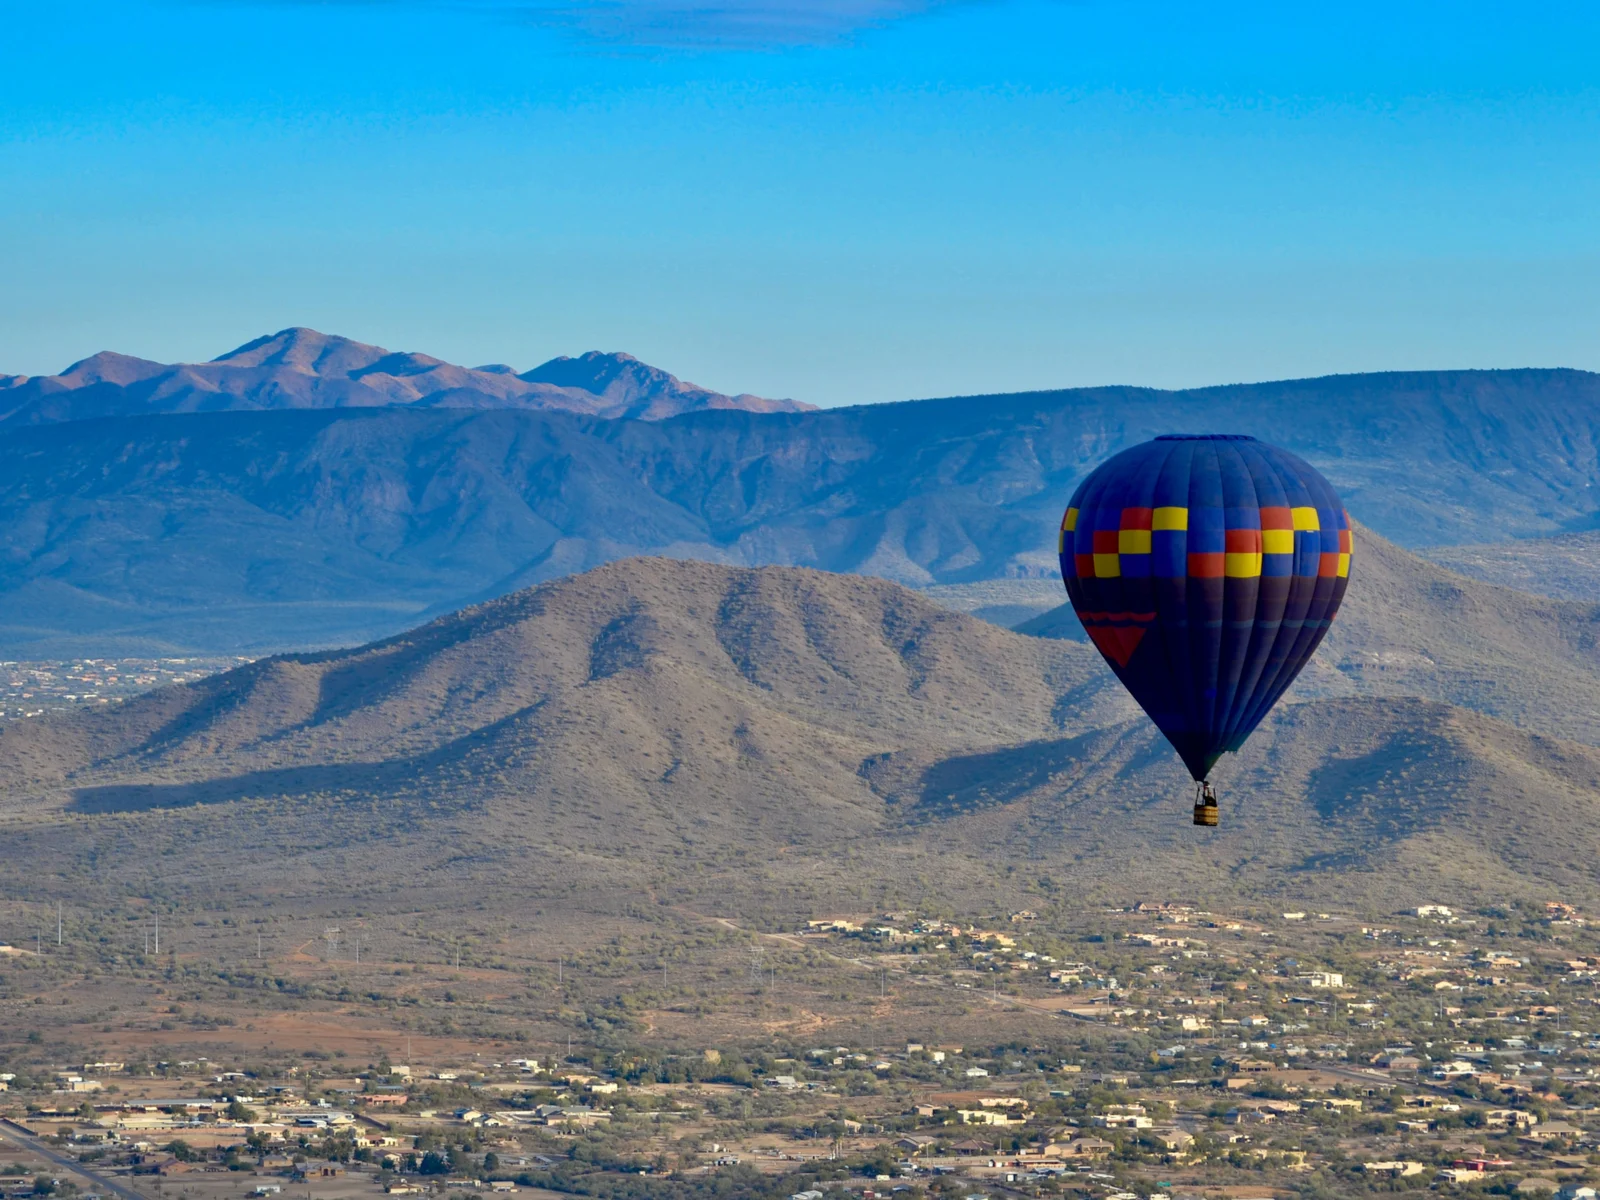 Misty Mountain as seen from a hot air balloon, one of the best things to do in Phoenix